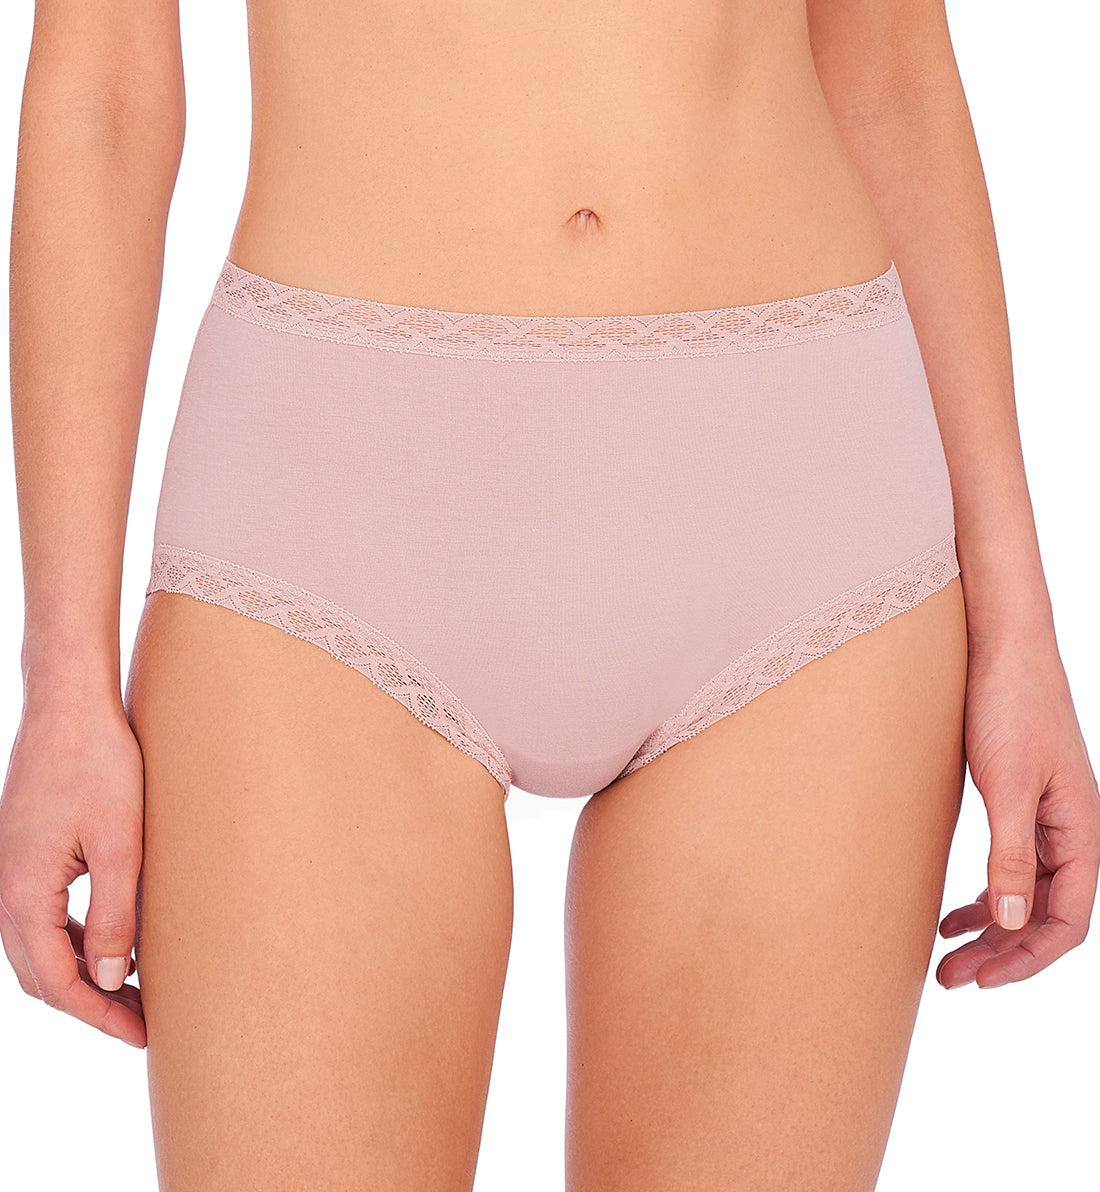 Natori Bliss Full Brief Panty (755058),Small,Rose Beige - Rose Beige,Small